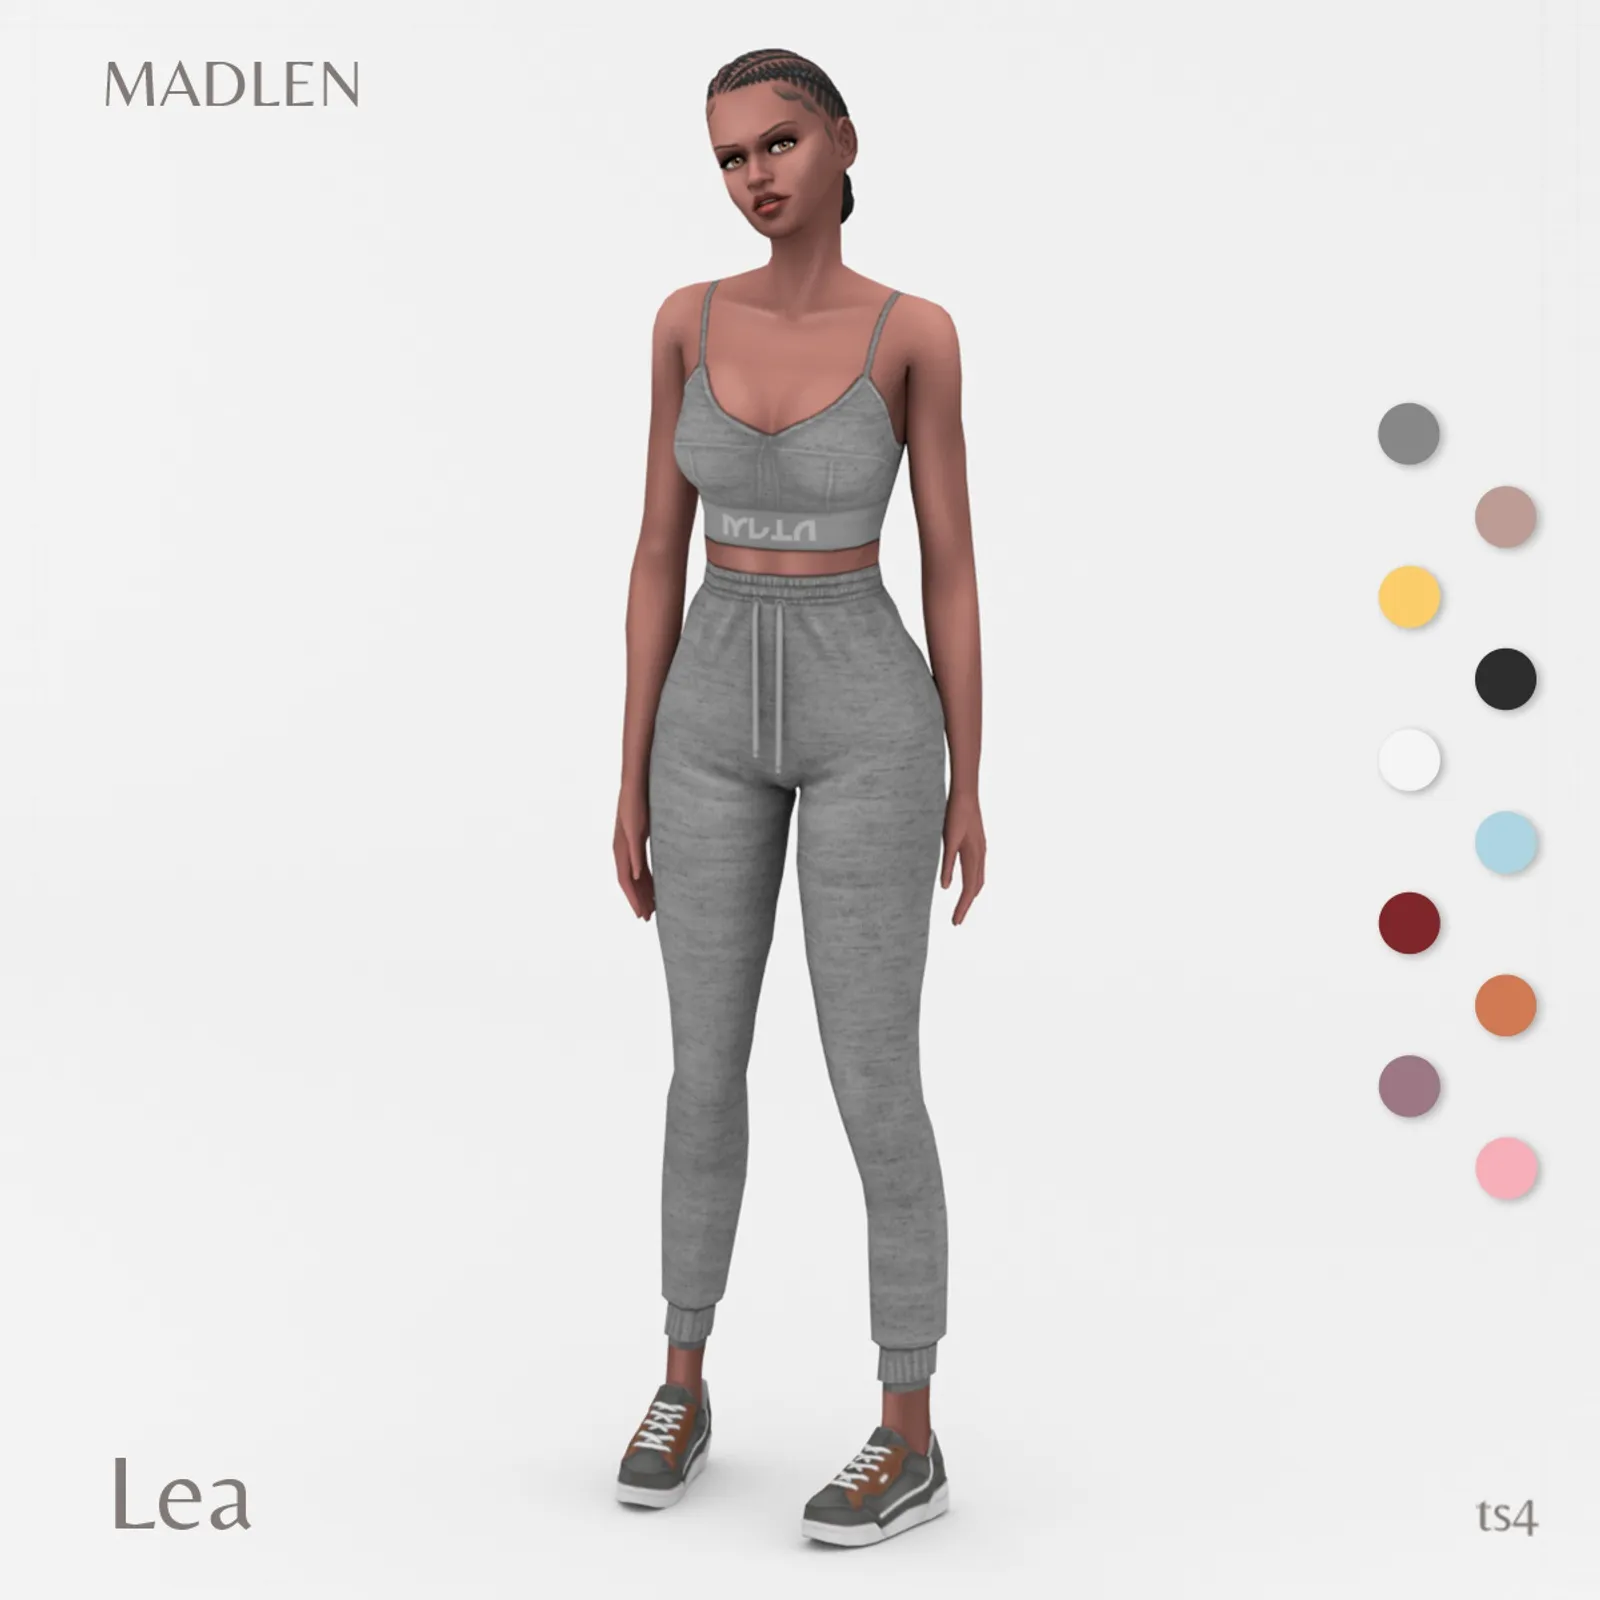 Lea Outfit